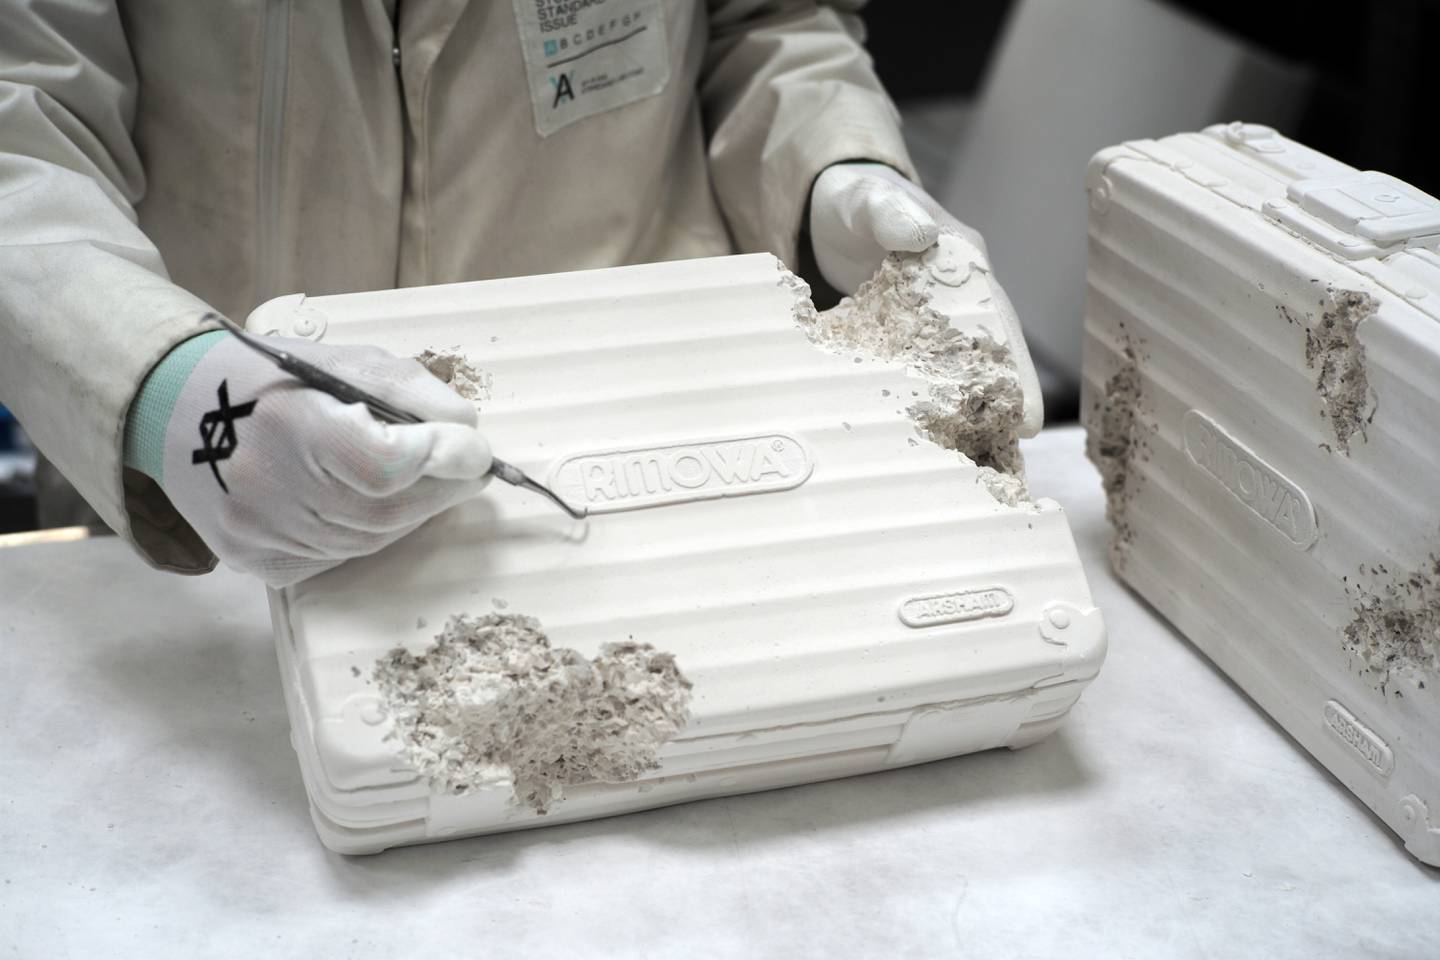 LVMH scion Alexandre Arnault has commissioned Daniel Arsham to create Rimowa suitcases and Tiffany boxes in his signature “future relics” style.